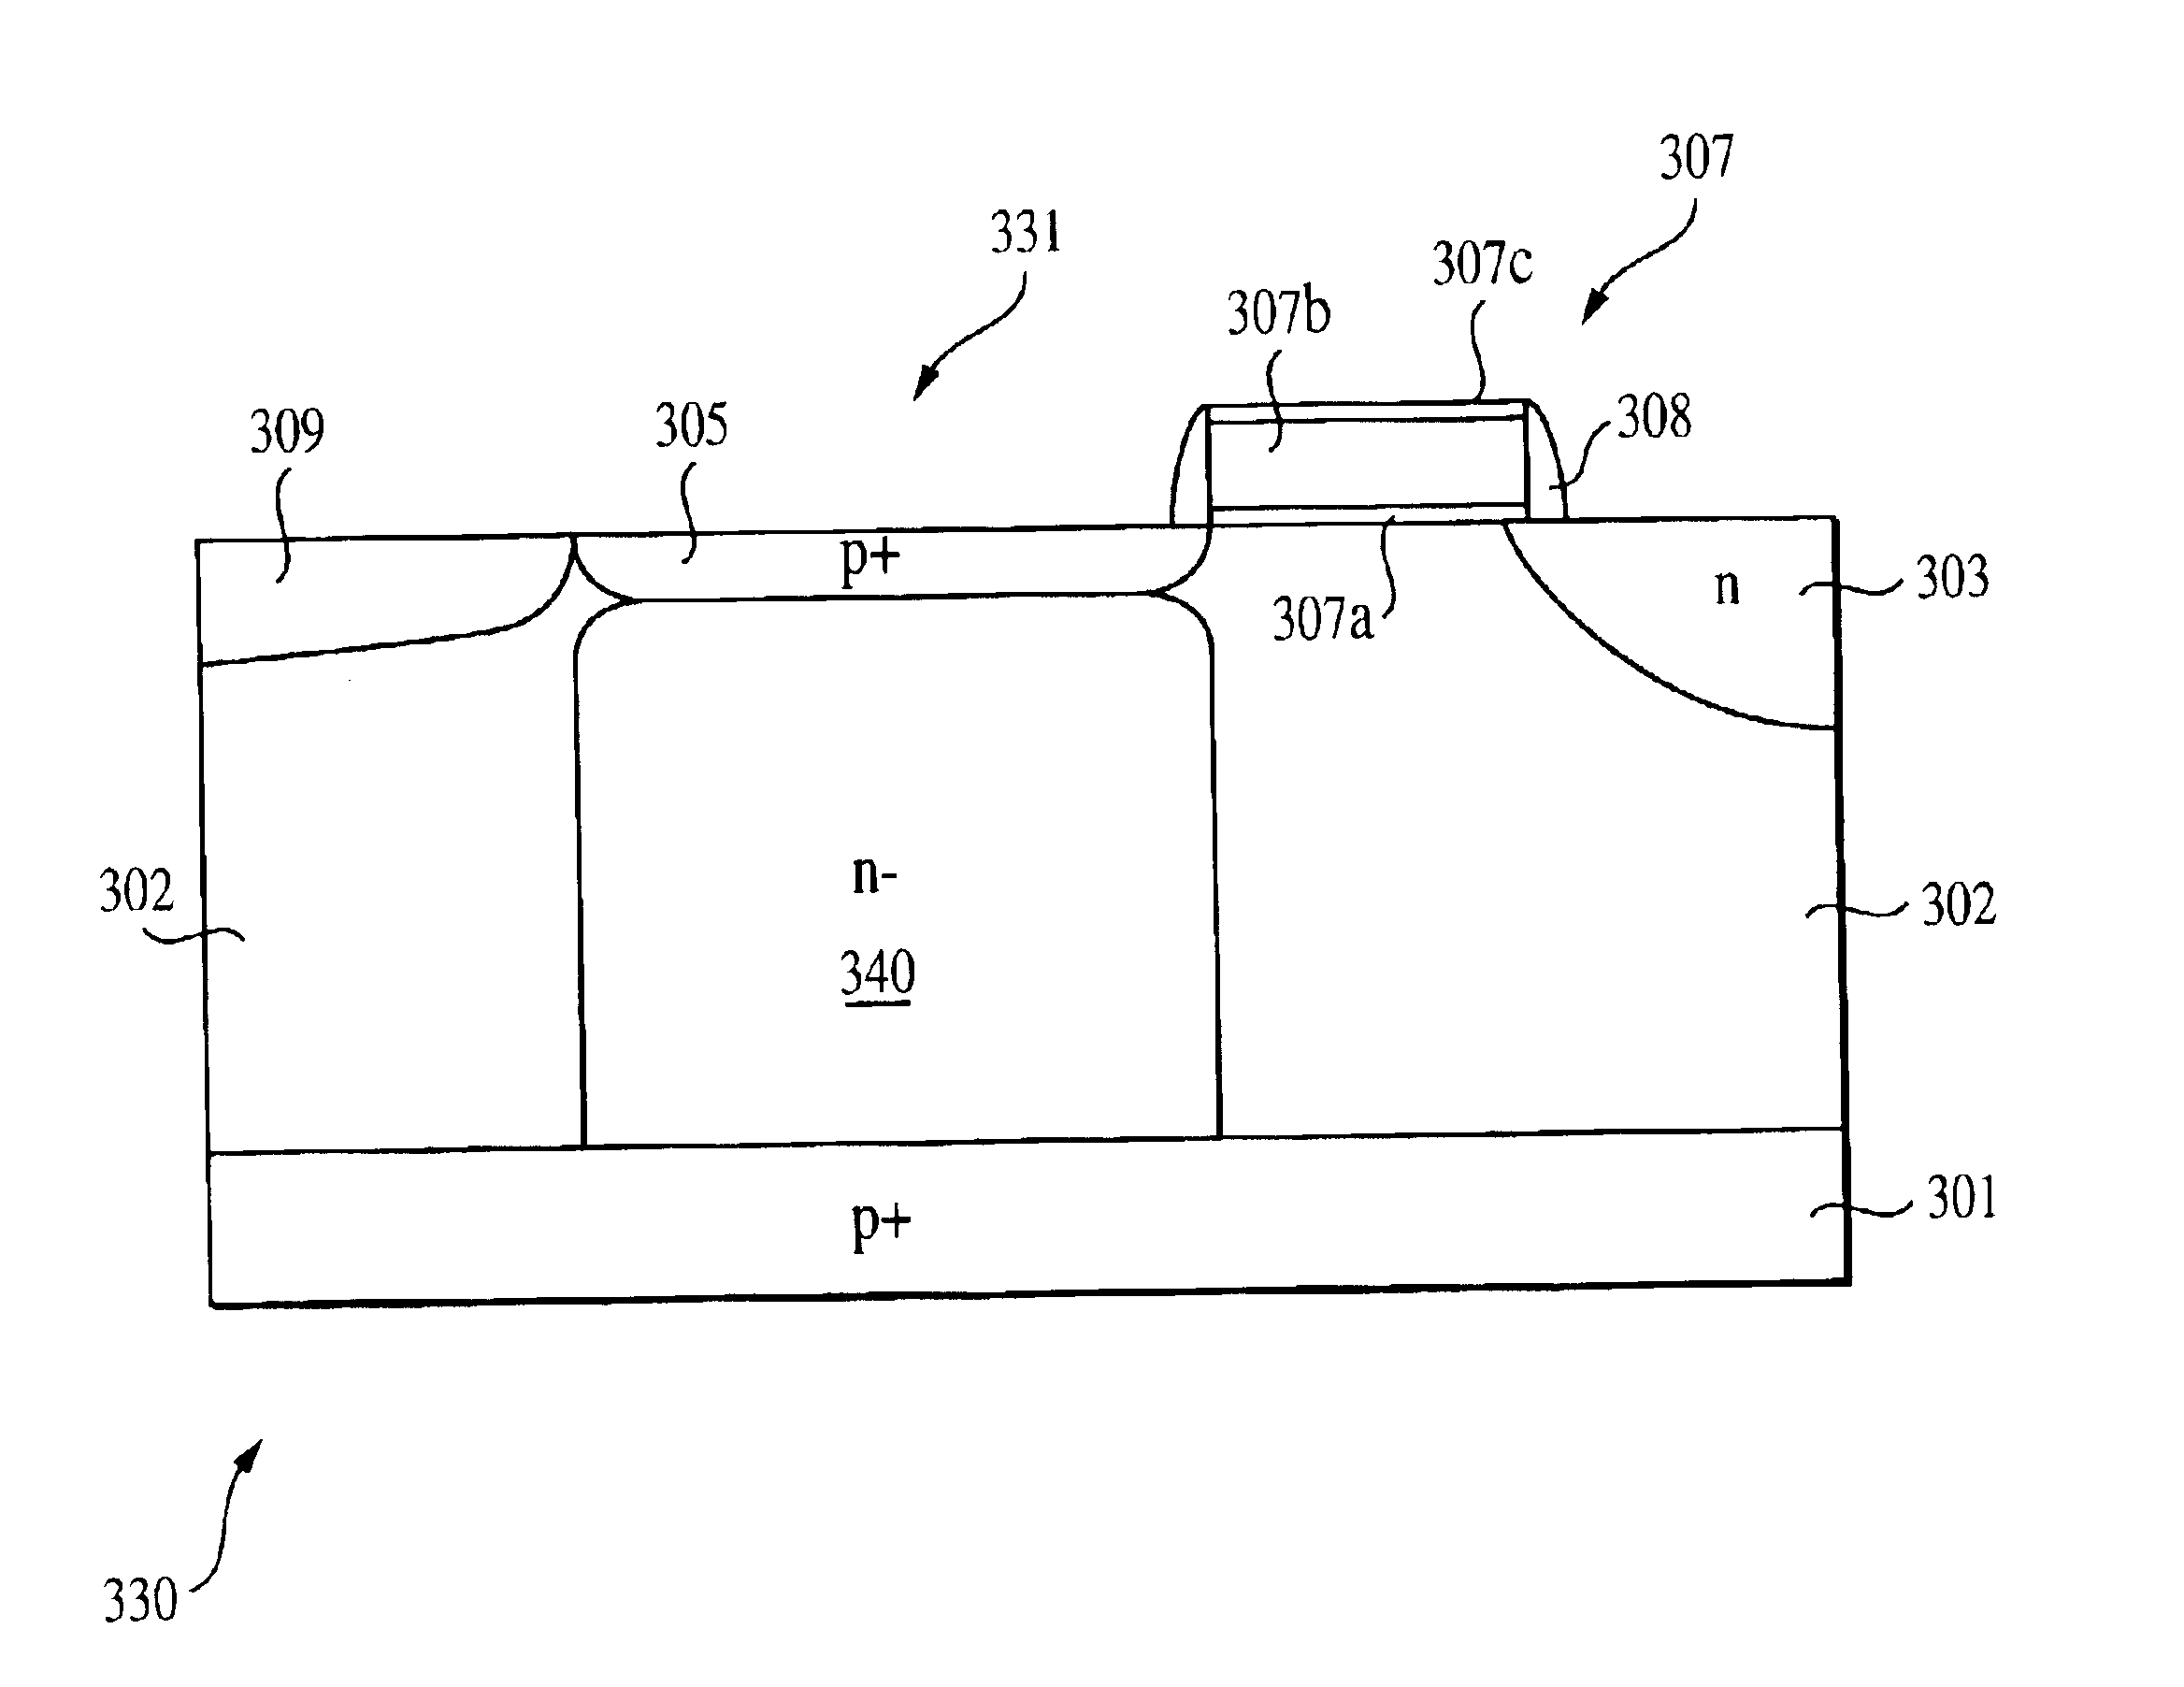 Double pinned photodiode for CMOS APS and method of formation